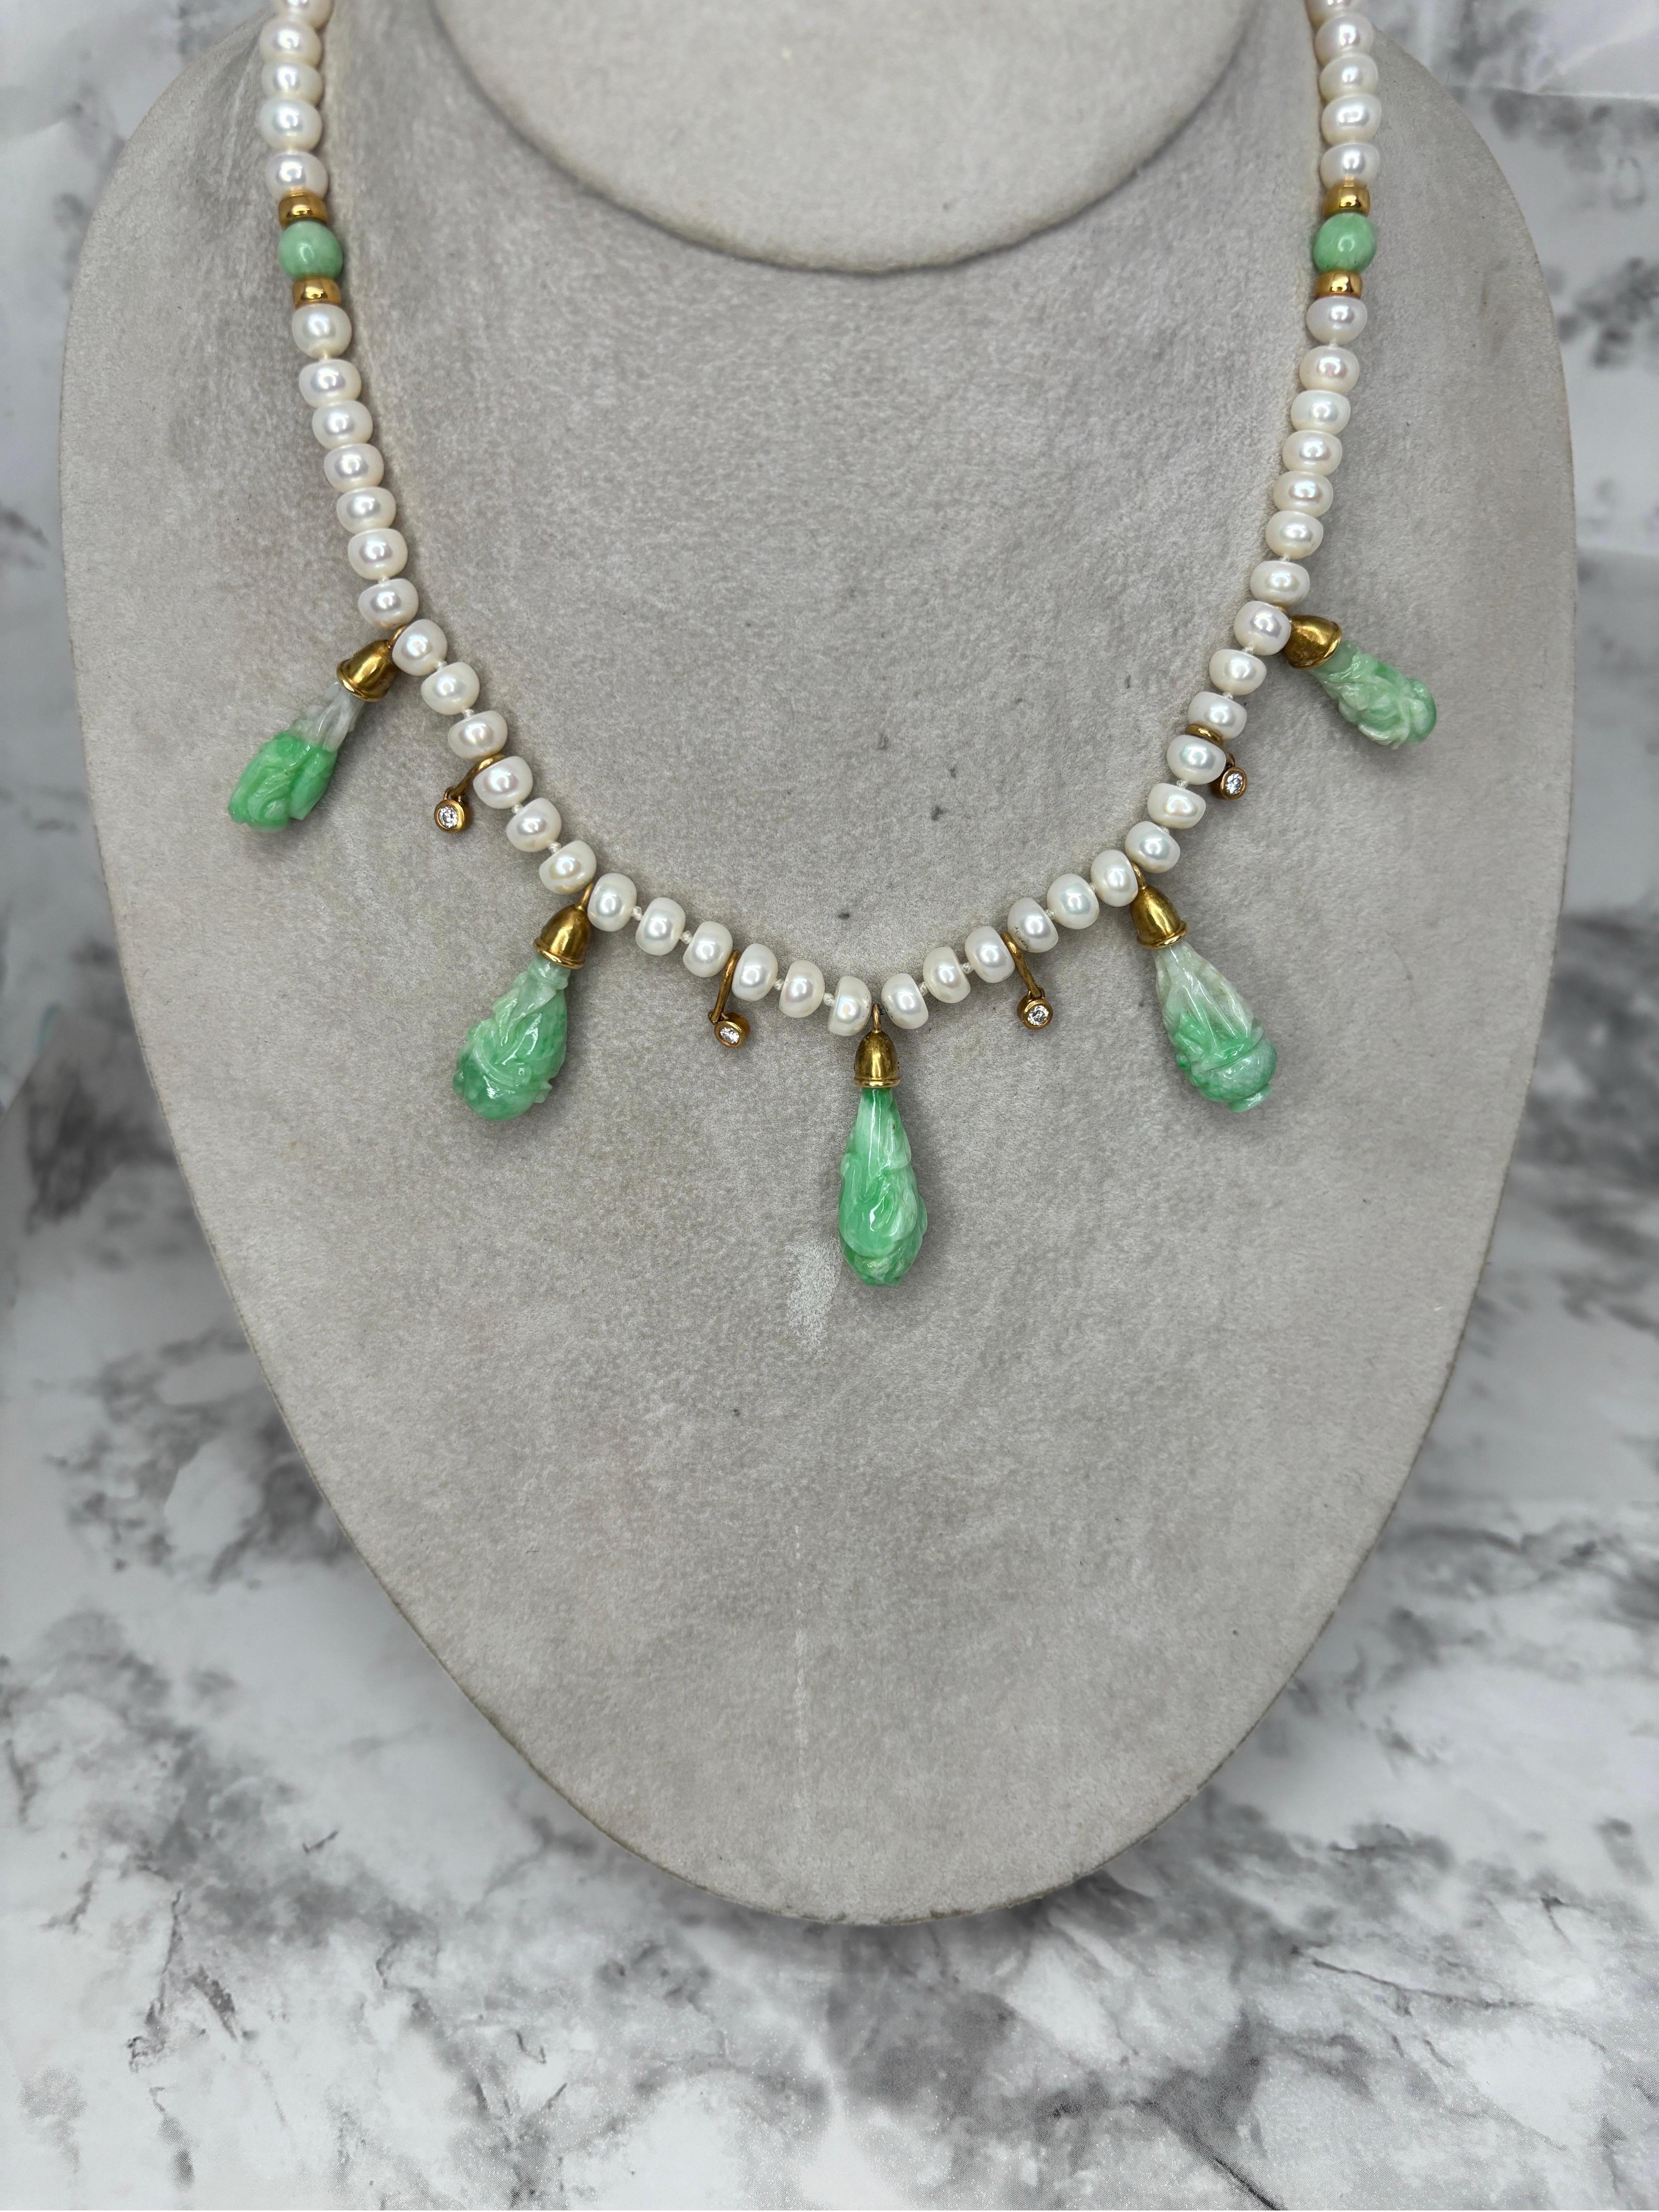 This exquisite carved Jadeite diamond & pearl 18k yellow gold necklace is a masterpiece of fine jewelry, combining elegance, craftsmanship, and the timeless allure of precious materials. 

The necklace features five beautifully carved green jadeite